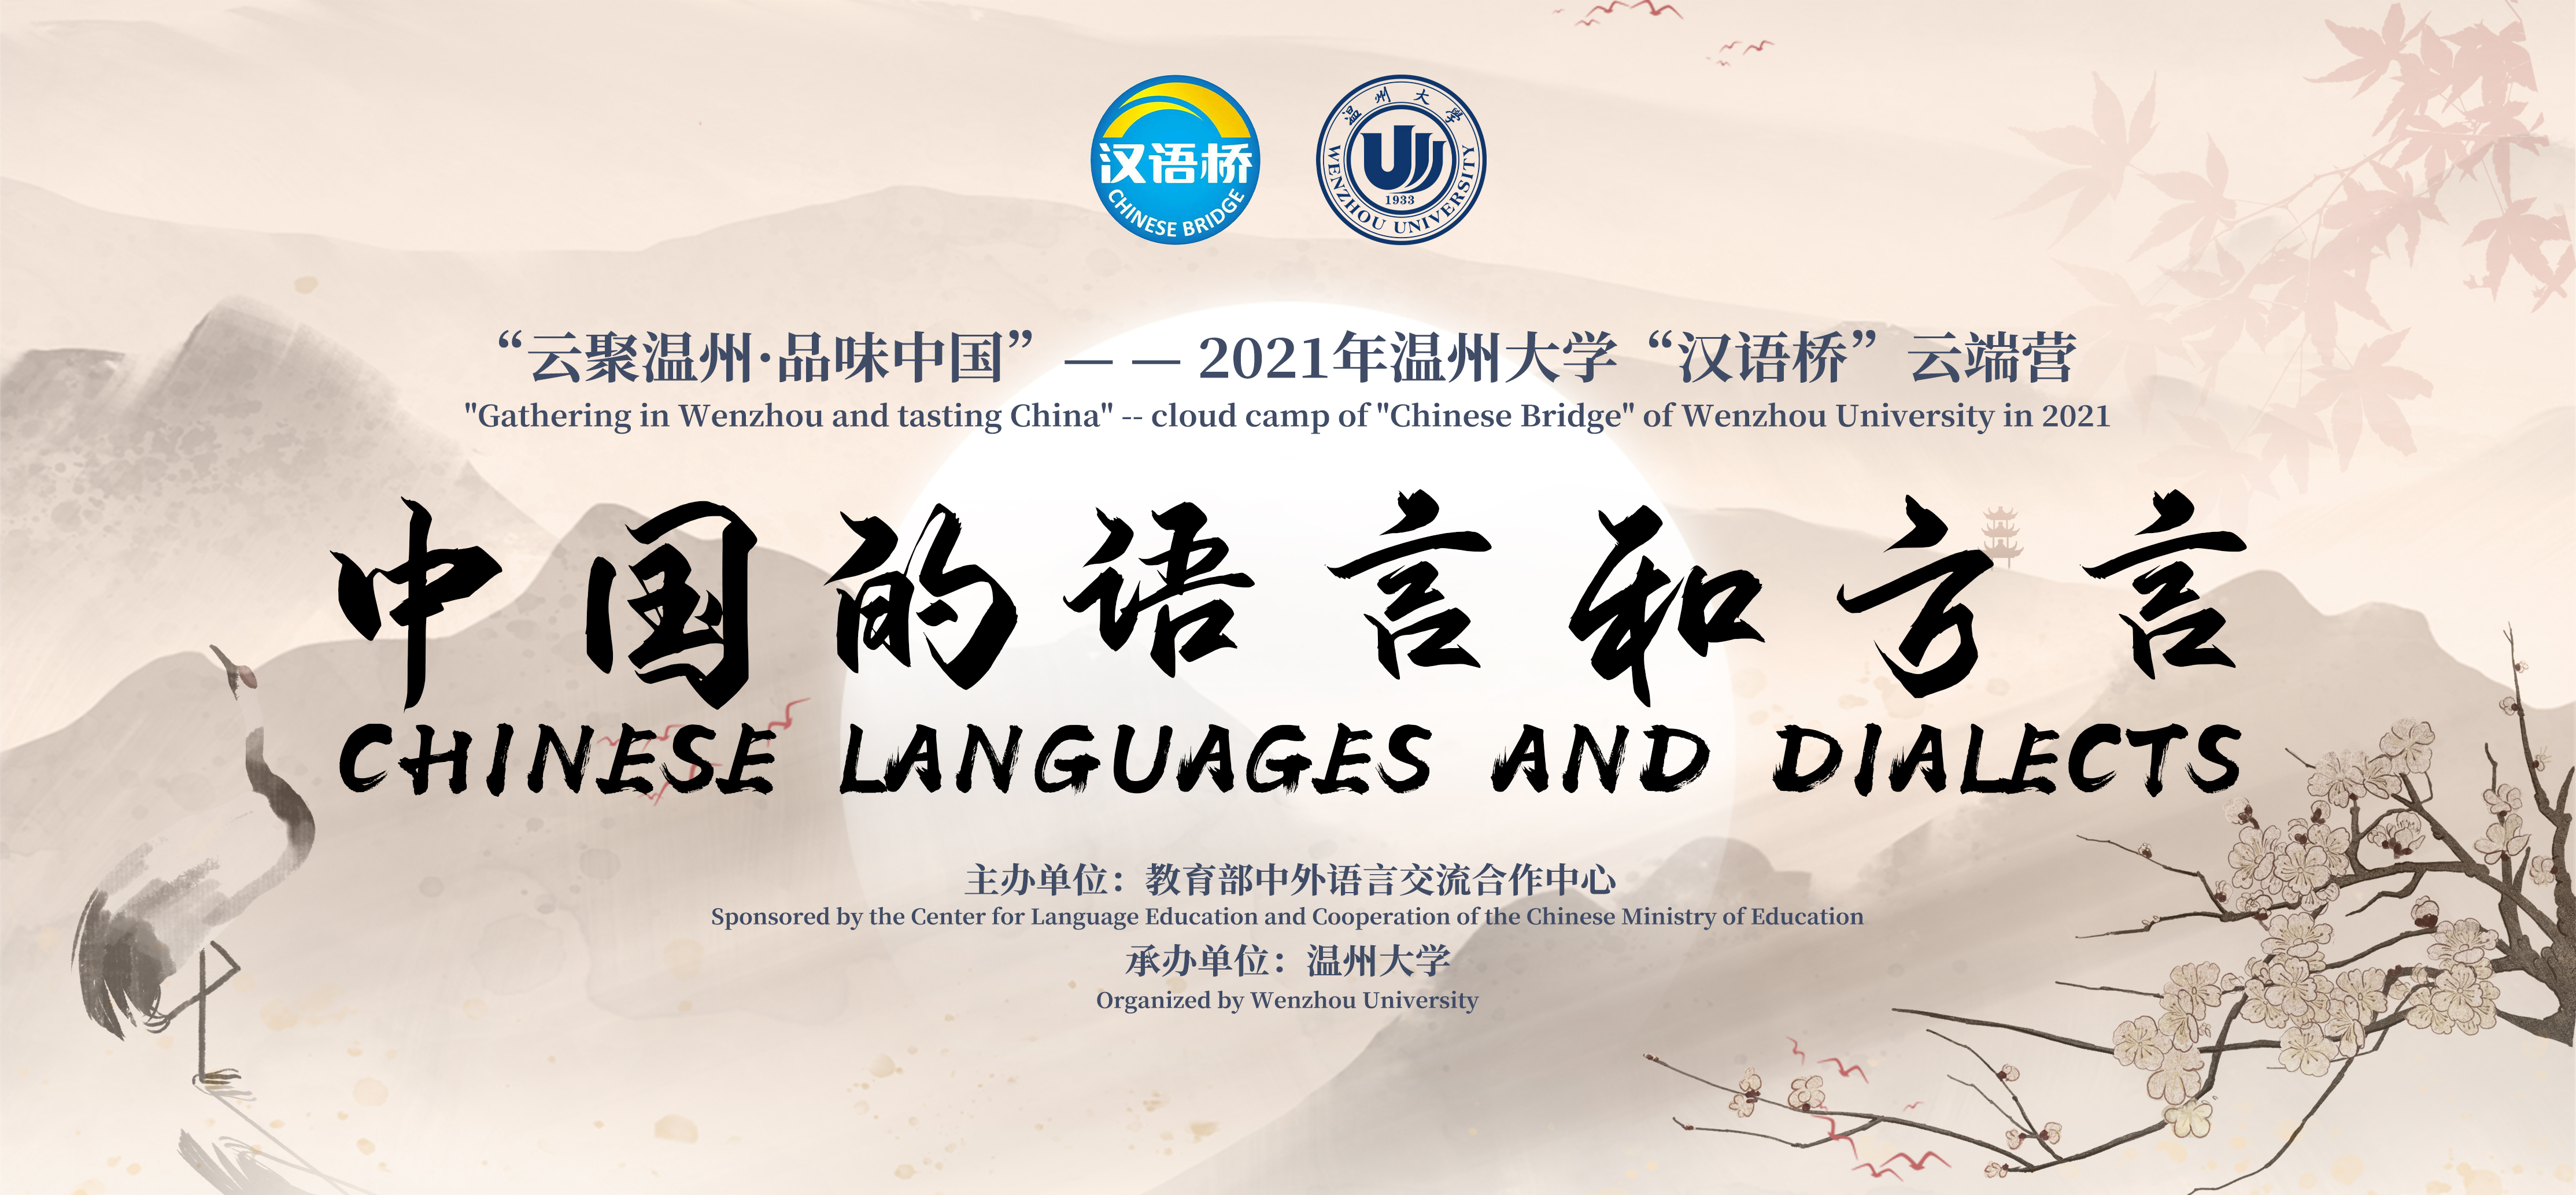 Chinese Languages and Dialects